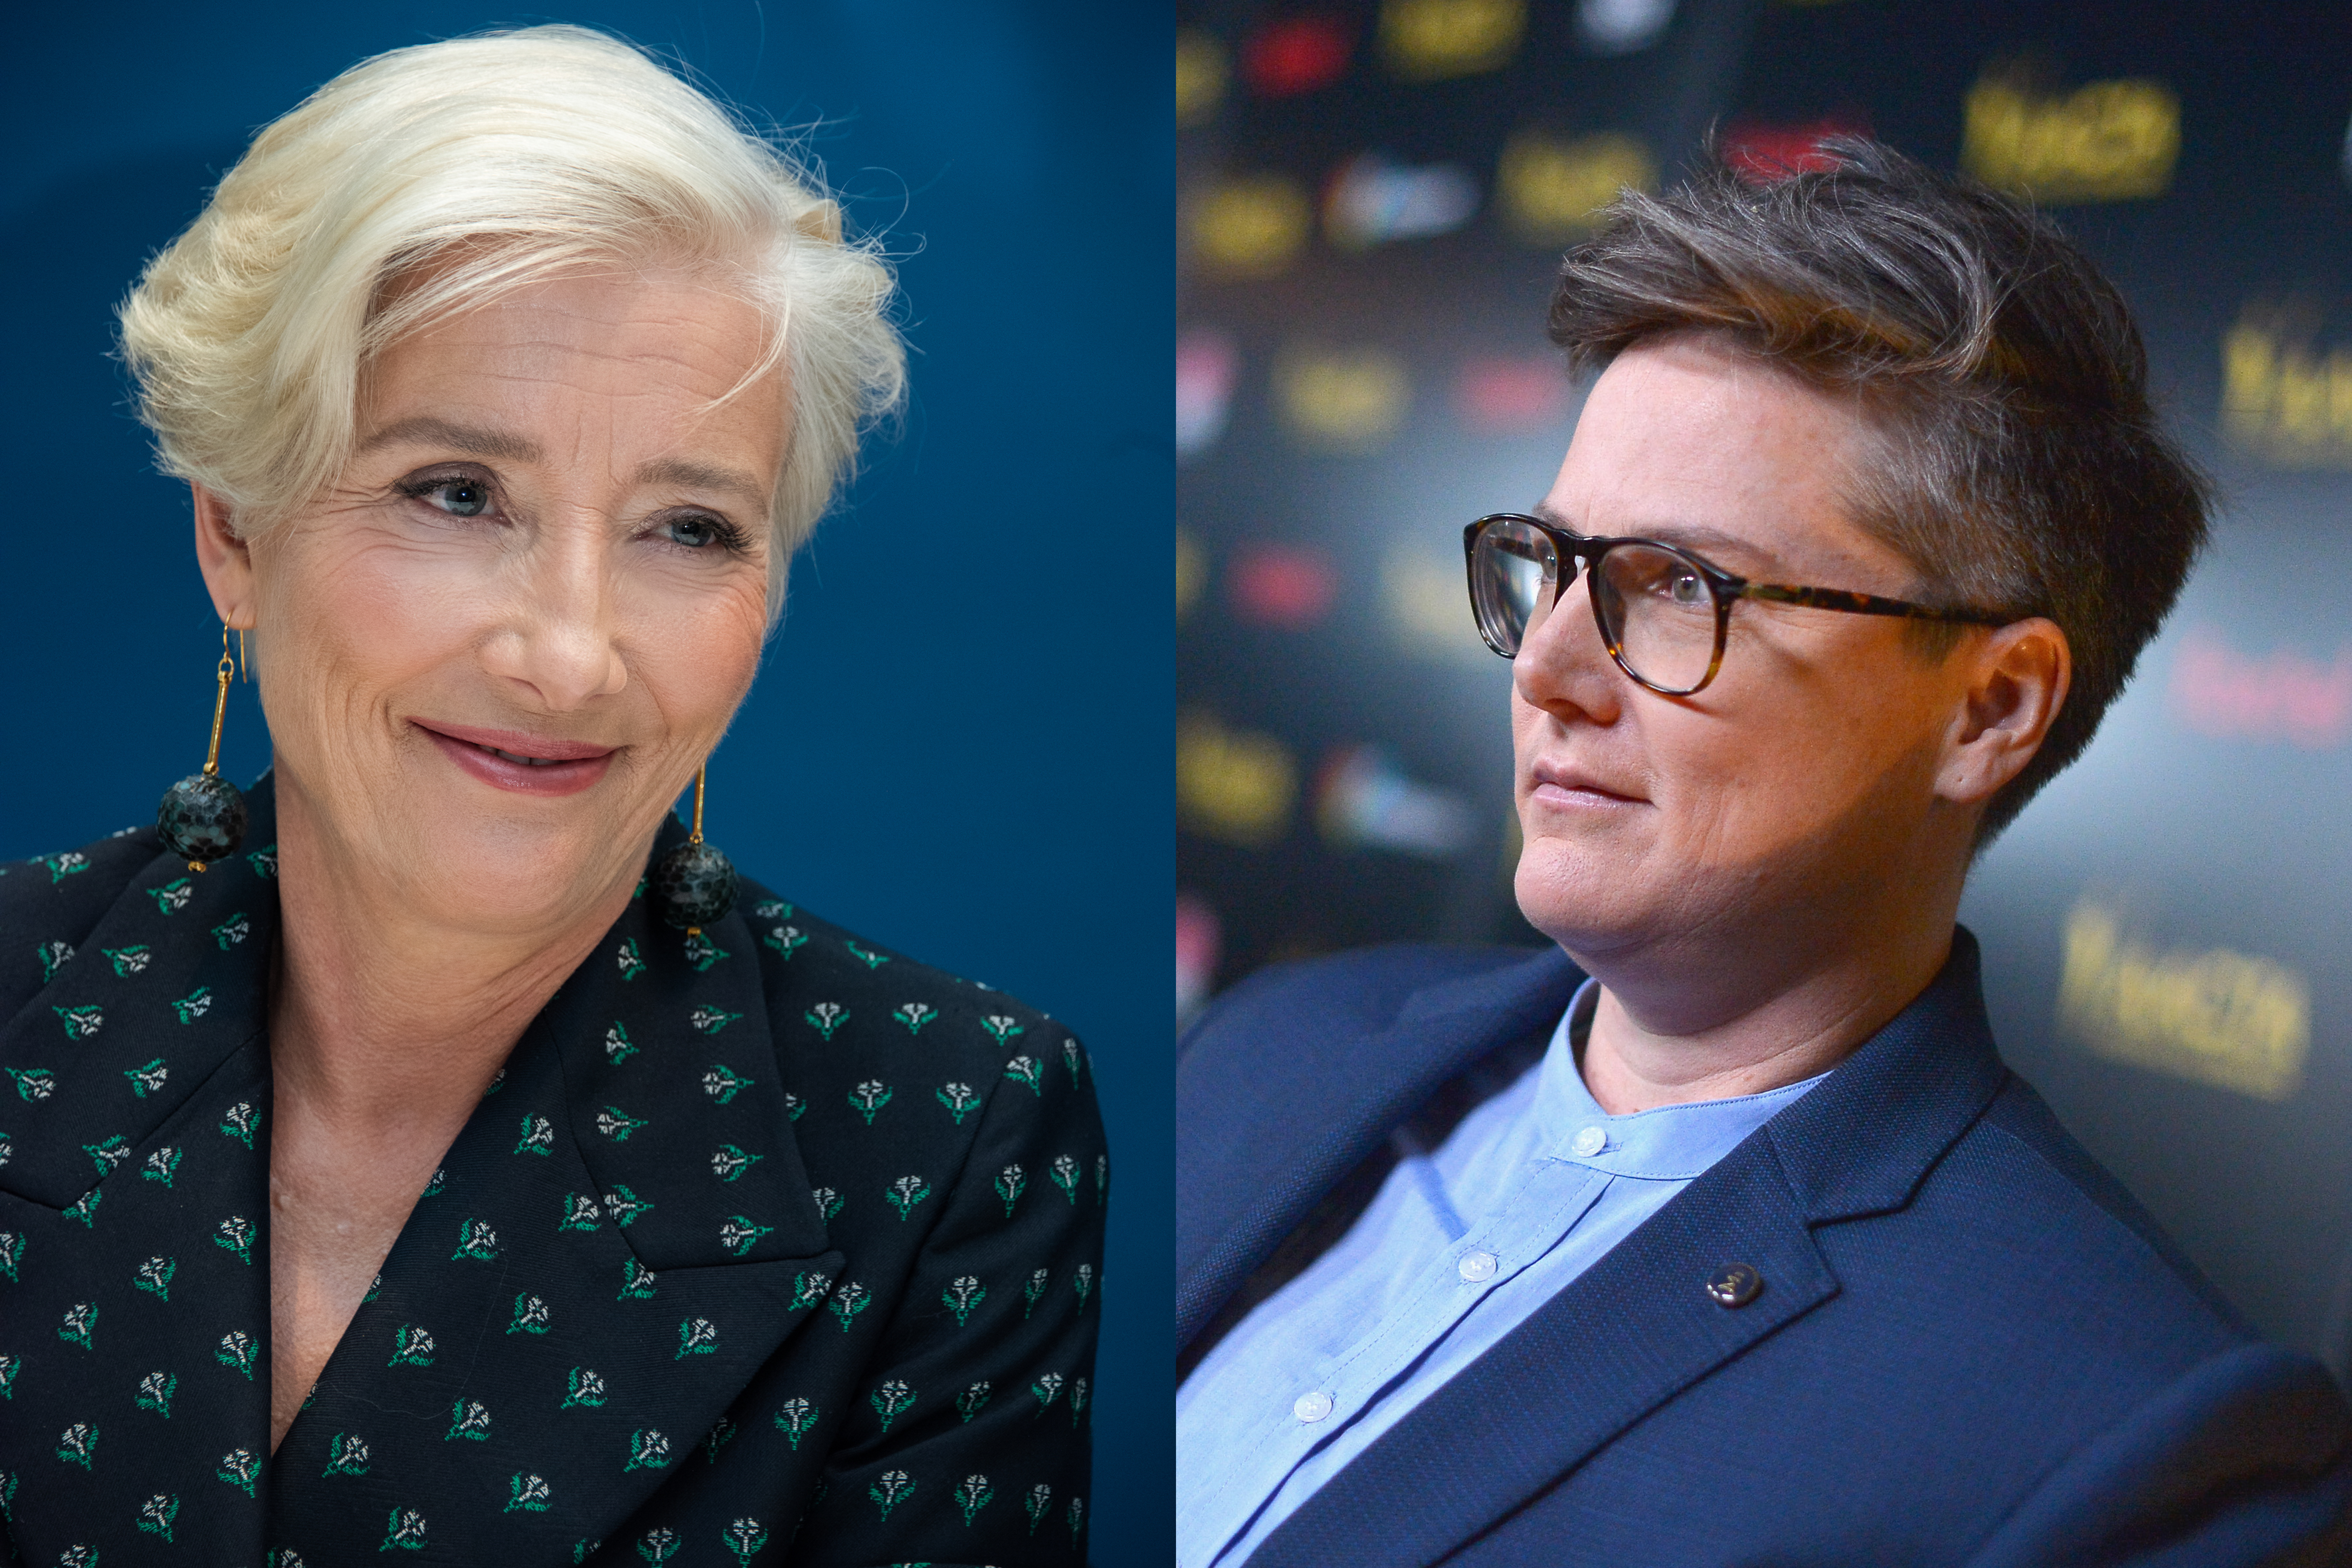 Douglas and Nanette star Hannah Gadsby joined Emma Thompson for pints in London